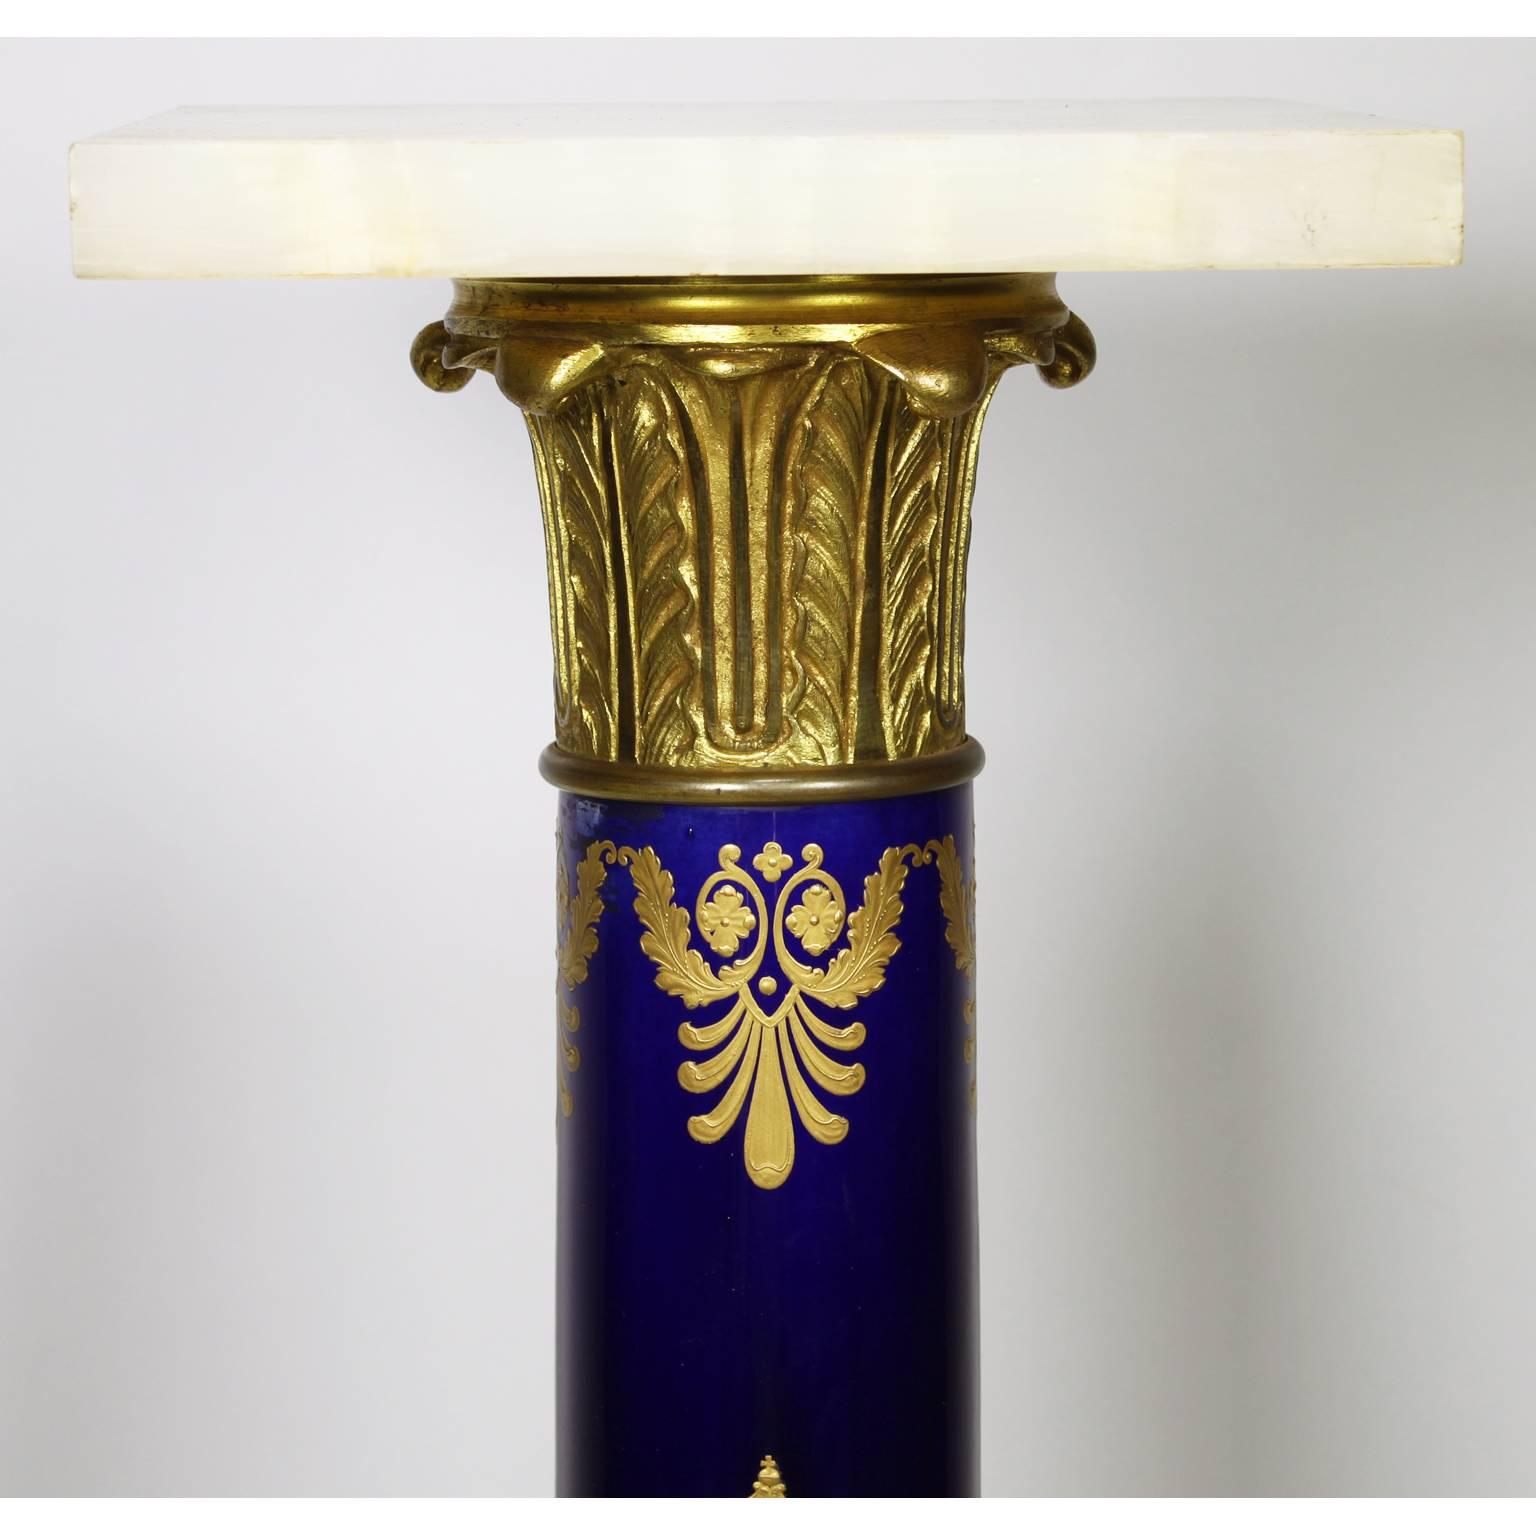 A fine French Empire Napoleon III probably sevres porcelain gilt bronze mounted and onyx pedestal stand with fine 24-carat gild decorated with wreaths around the letter 